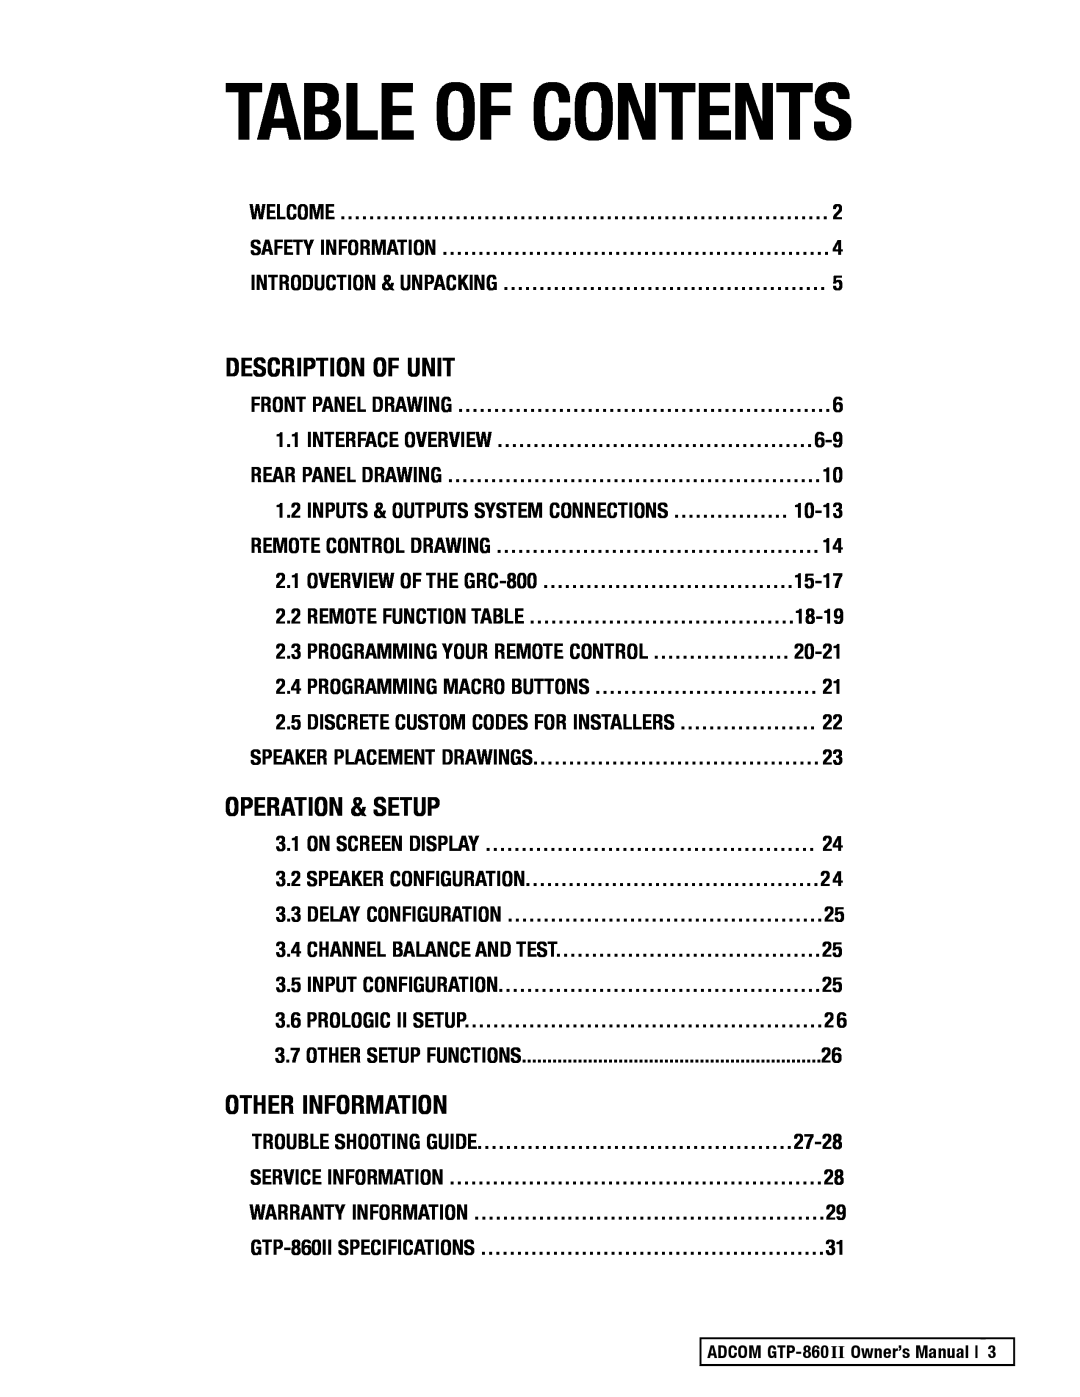 Adcom GTP-860II manual Description Of Unit, Operation & Setup, Other Information, Table Of Contents 